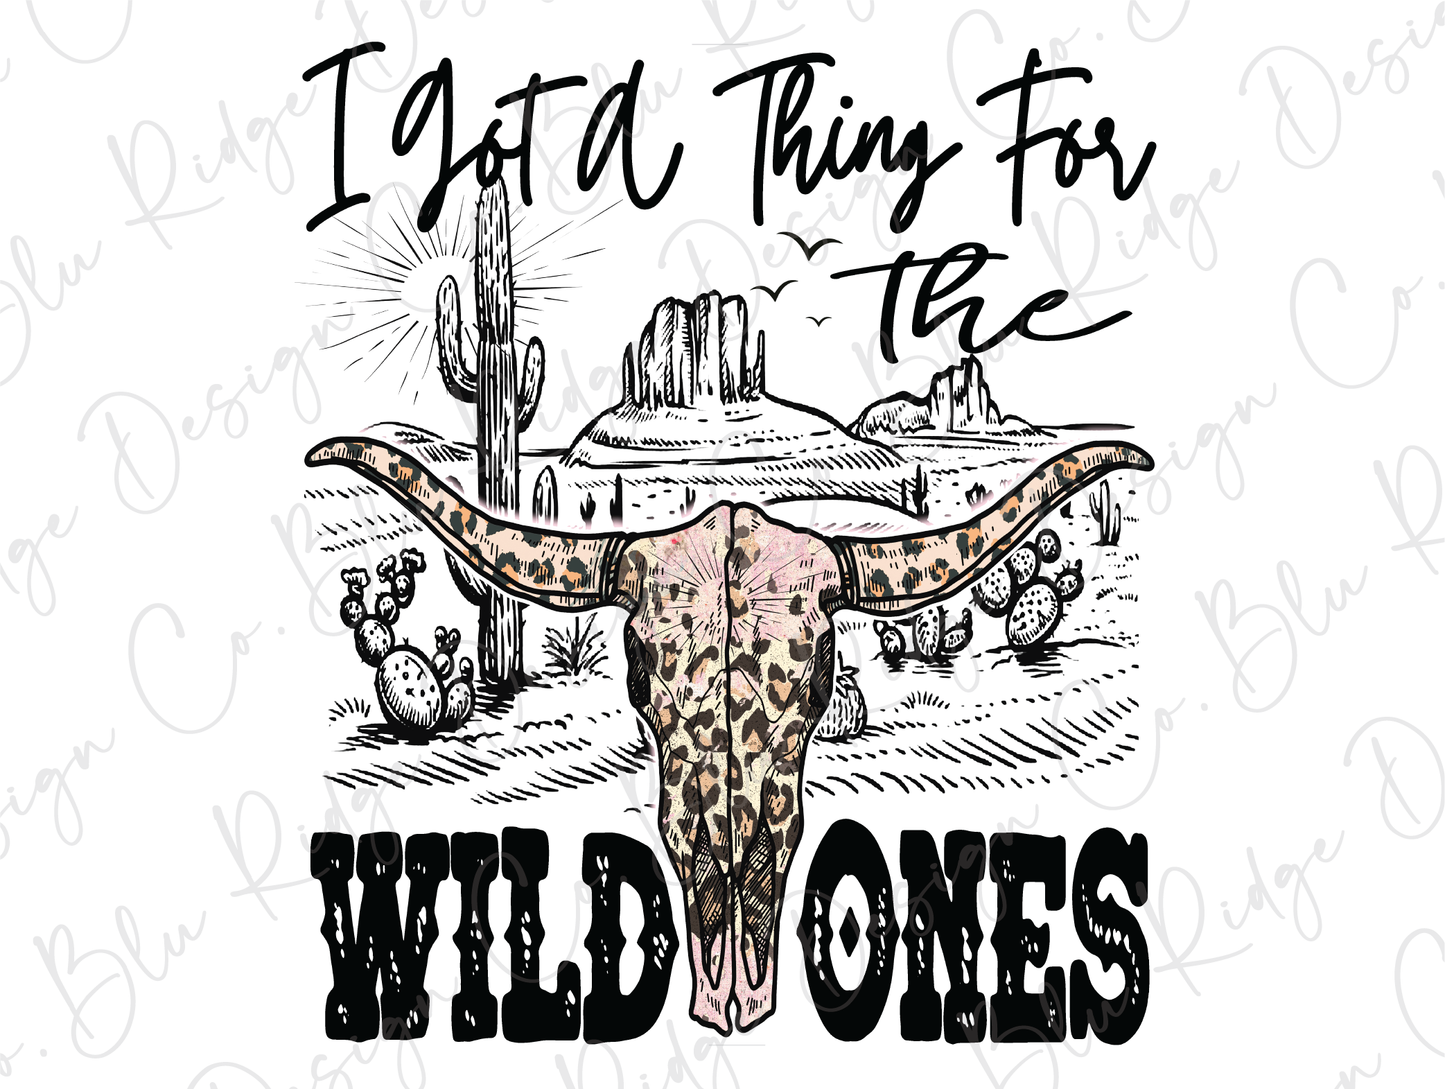 a cow skull with a long horn and the words wild ones on it